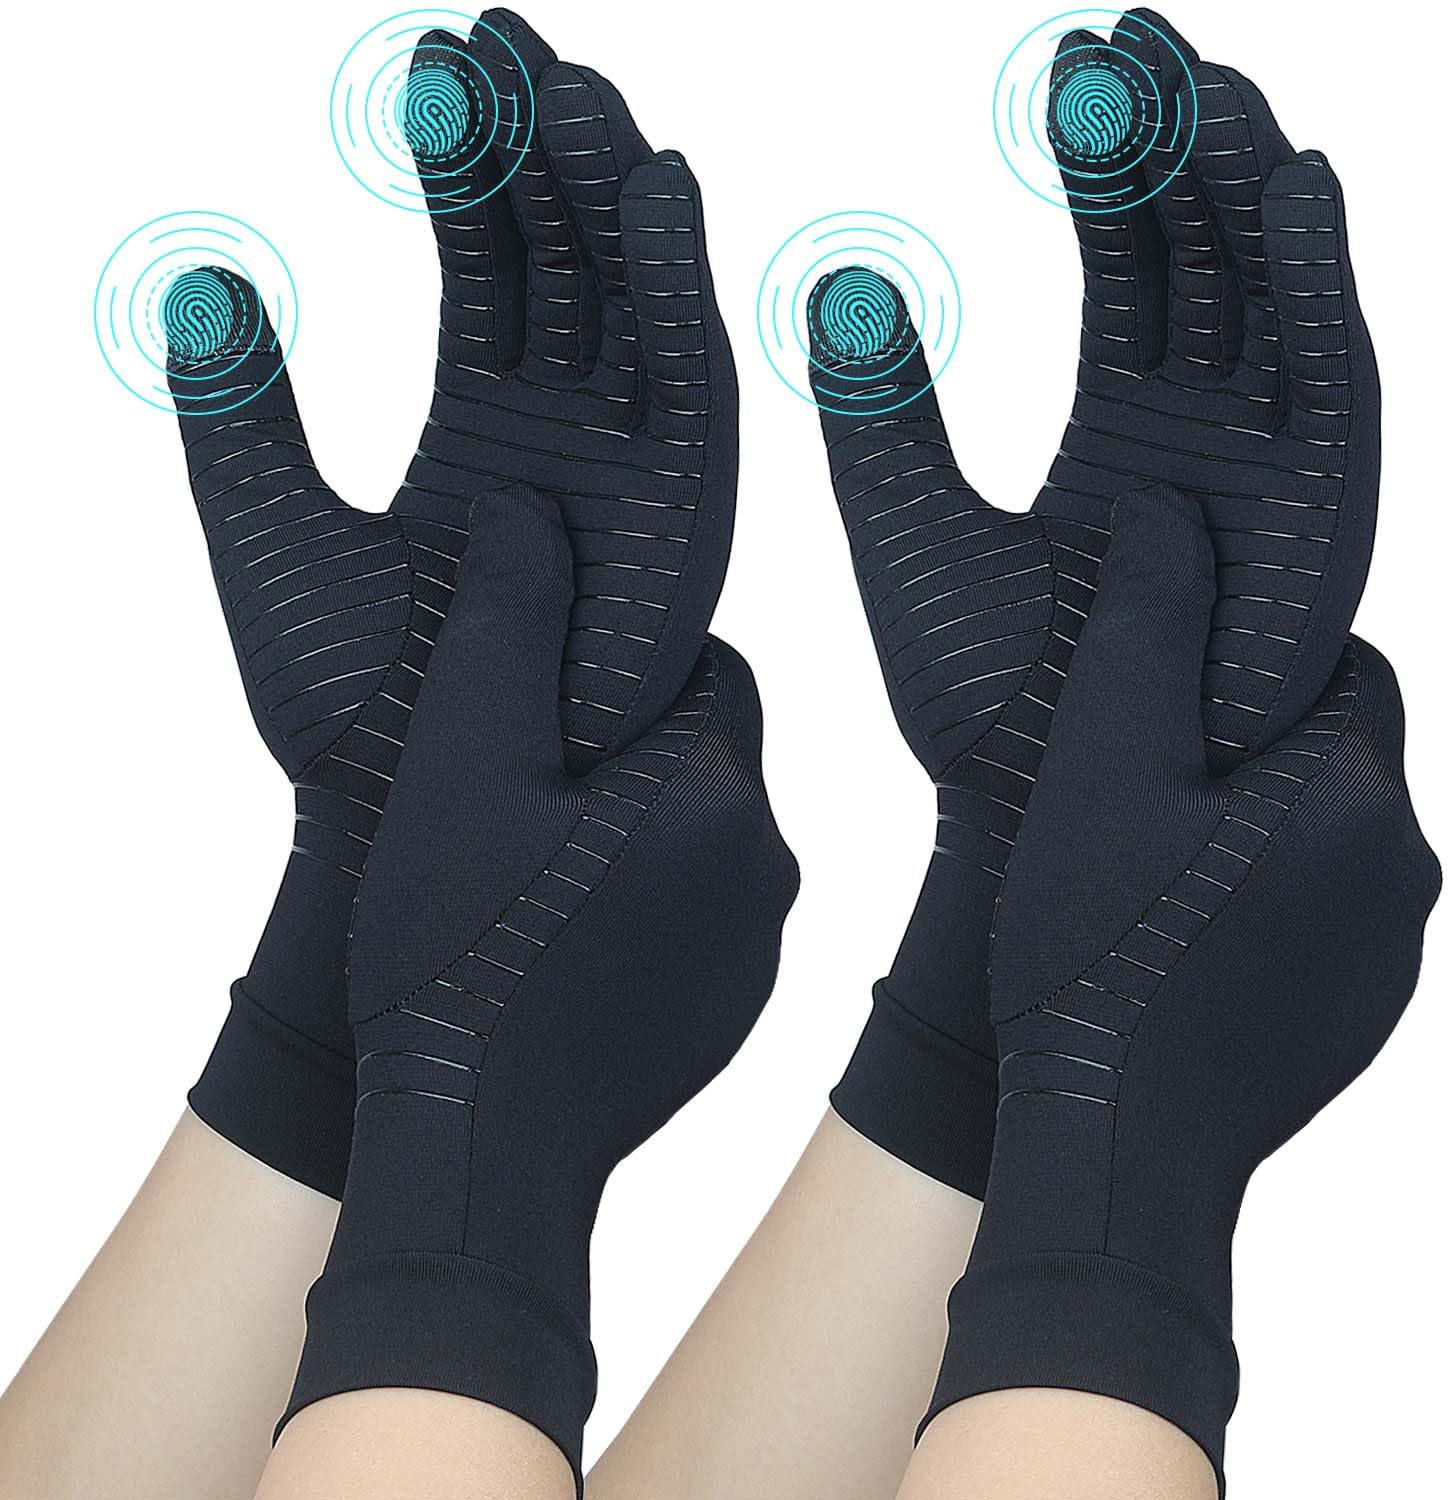 2 Pairs Full Finger Copper Arthritis Gloves with Touchscreen Tip, Compression Gloves for Women Men, Relief for Rheumatoid, Osteoarthritis, Carpal Tunnel, Hand Pain, Tendonitis, Computer Typing